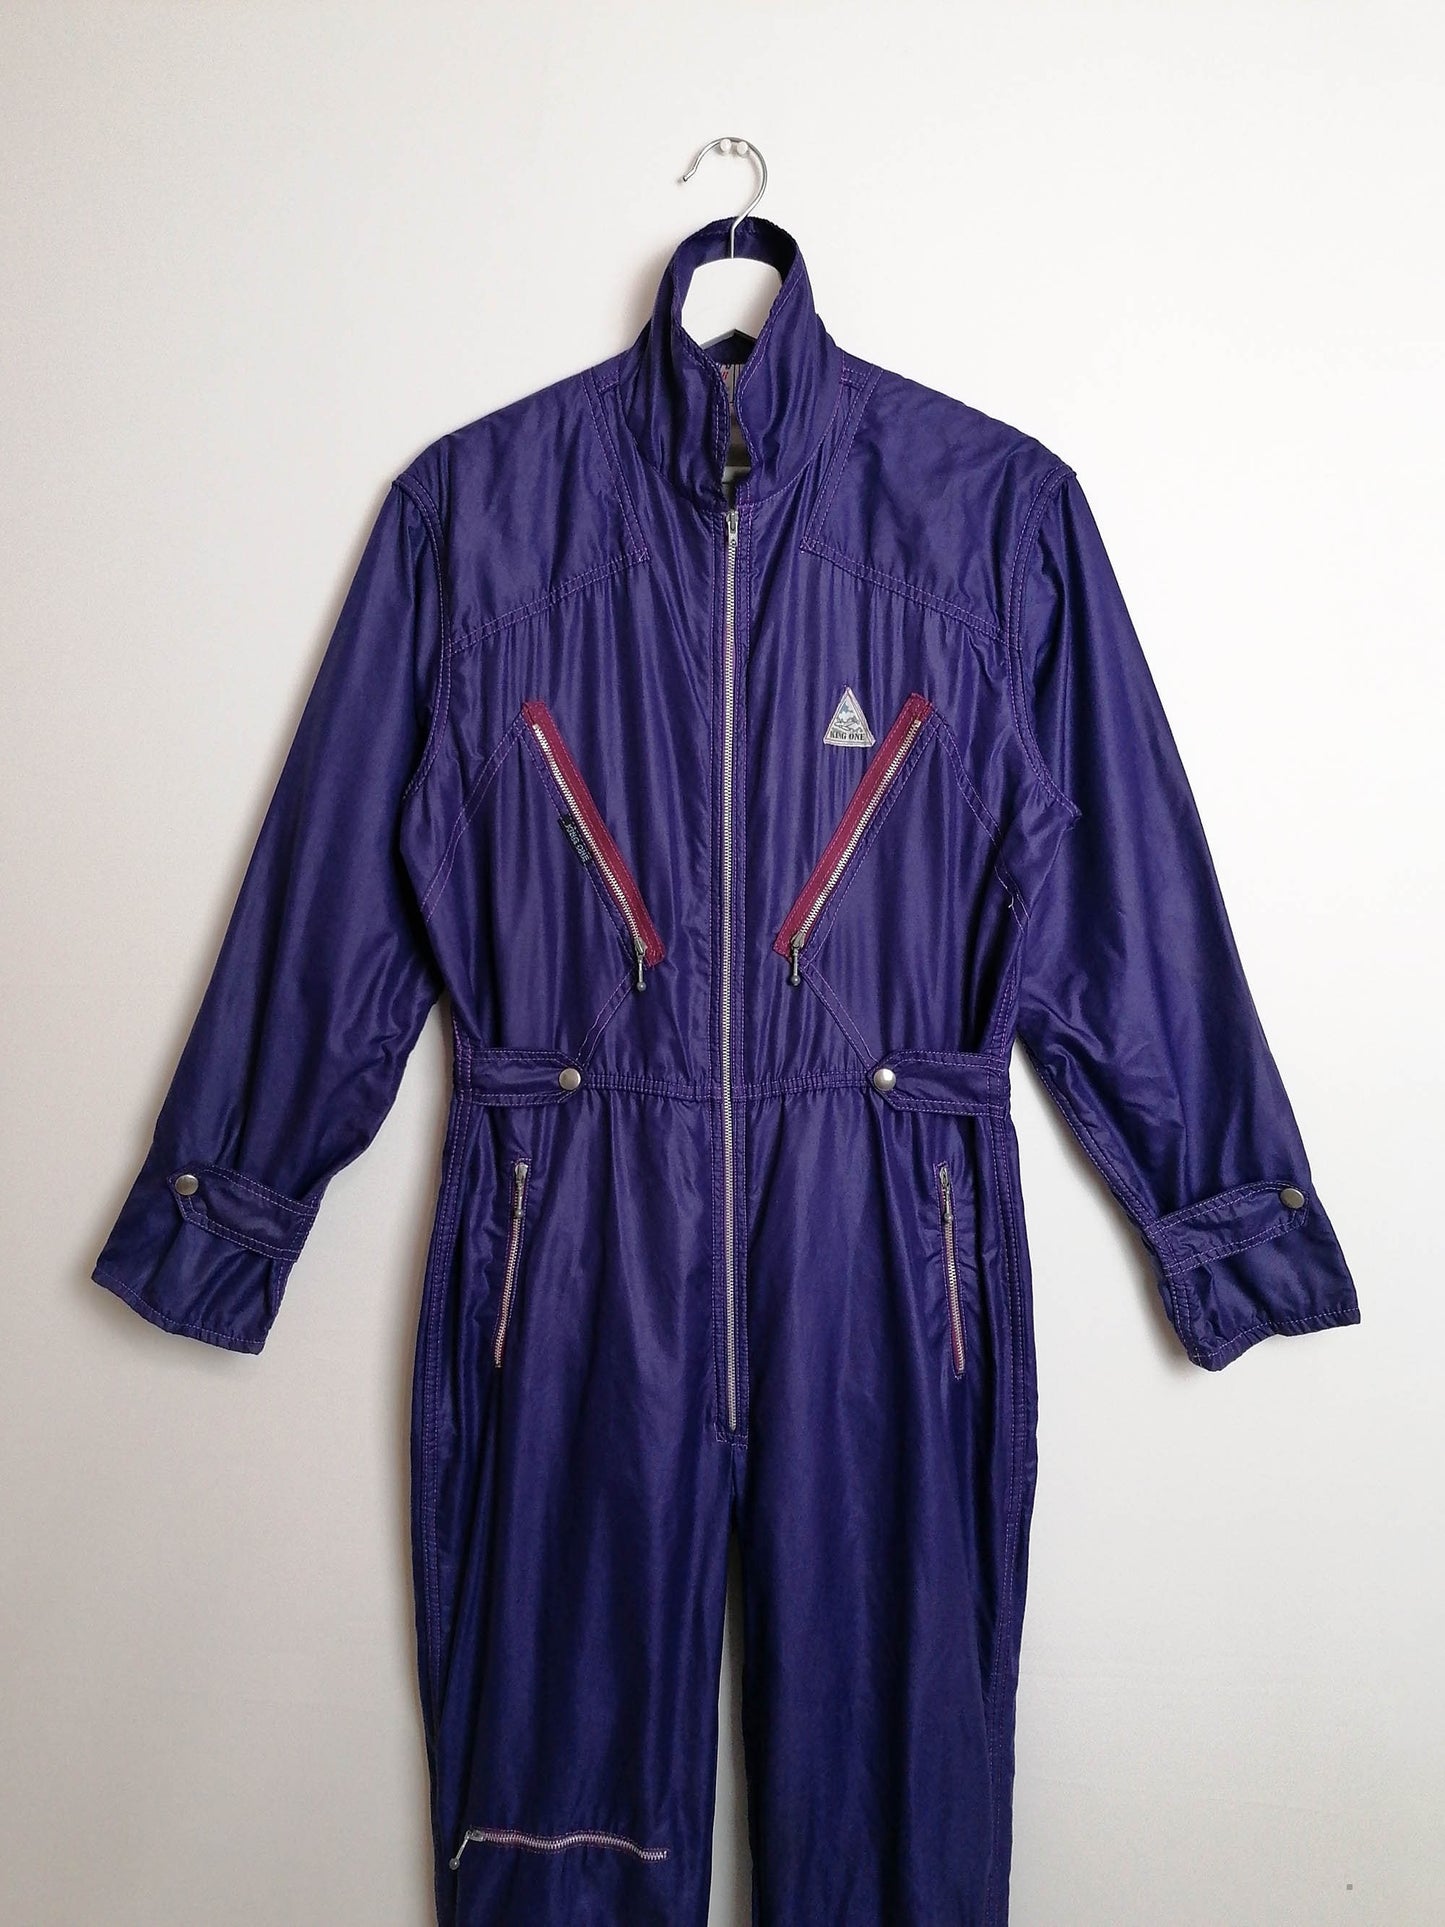 80's KING ONE Safteywear Made in France Jumpsuit - size S-M